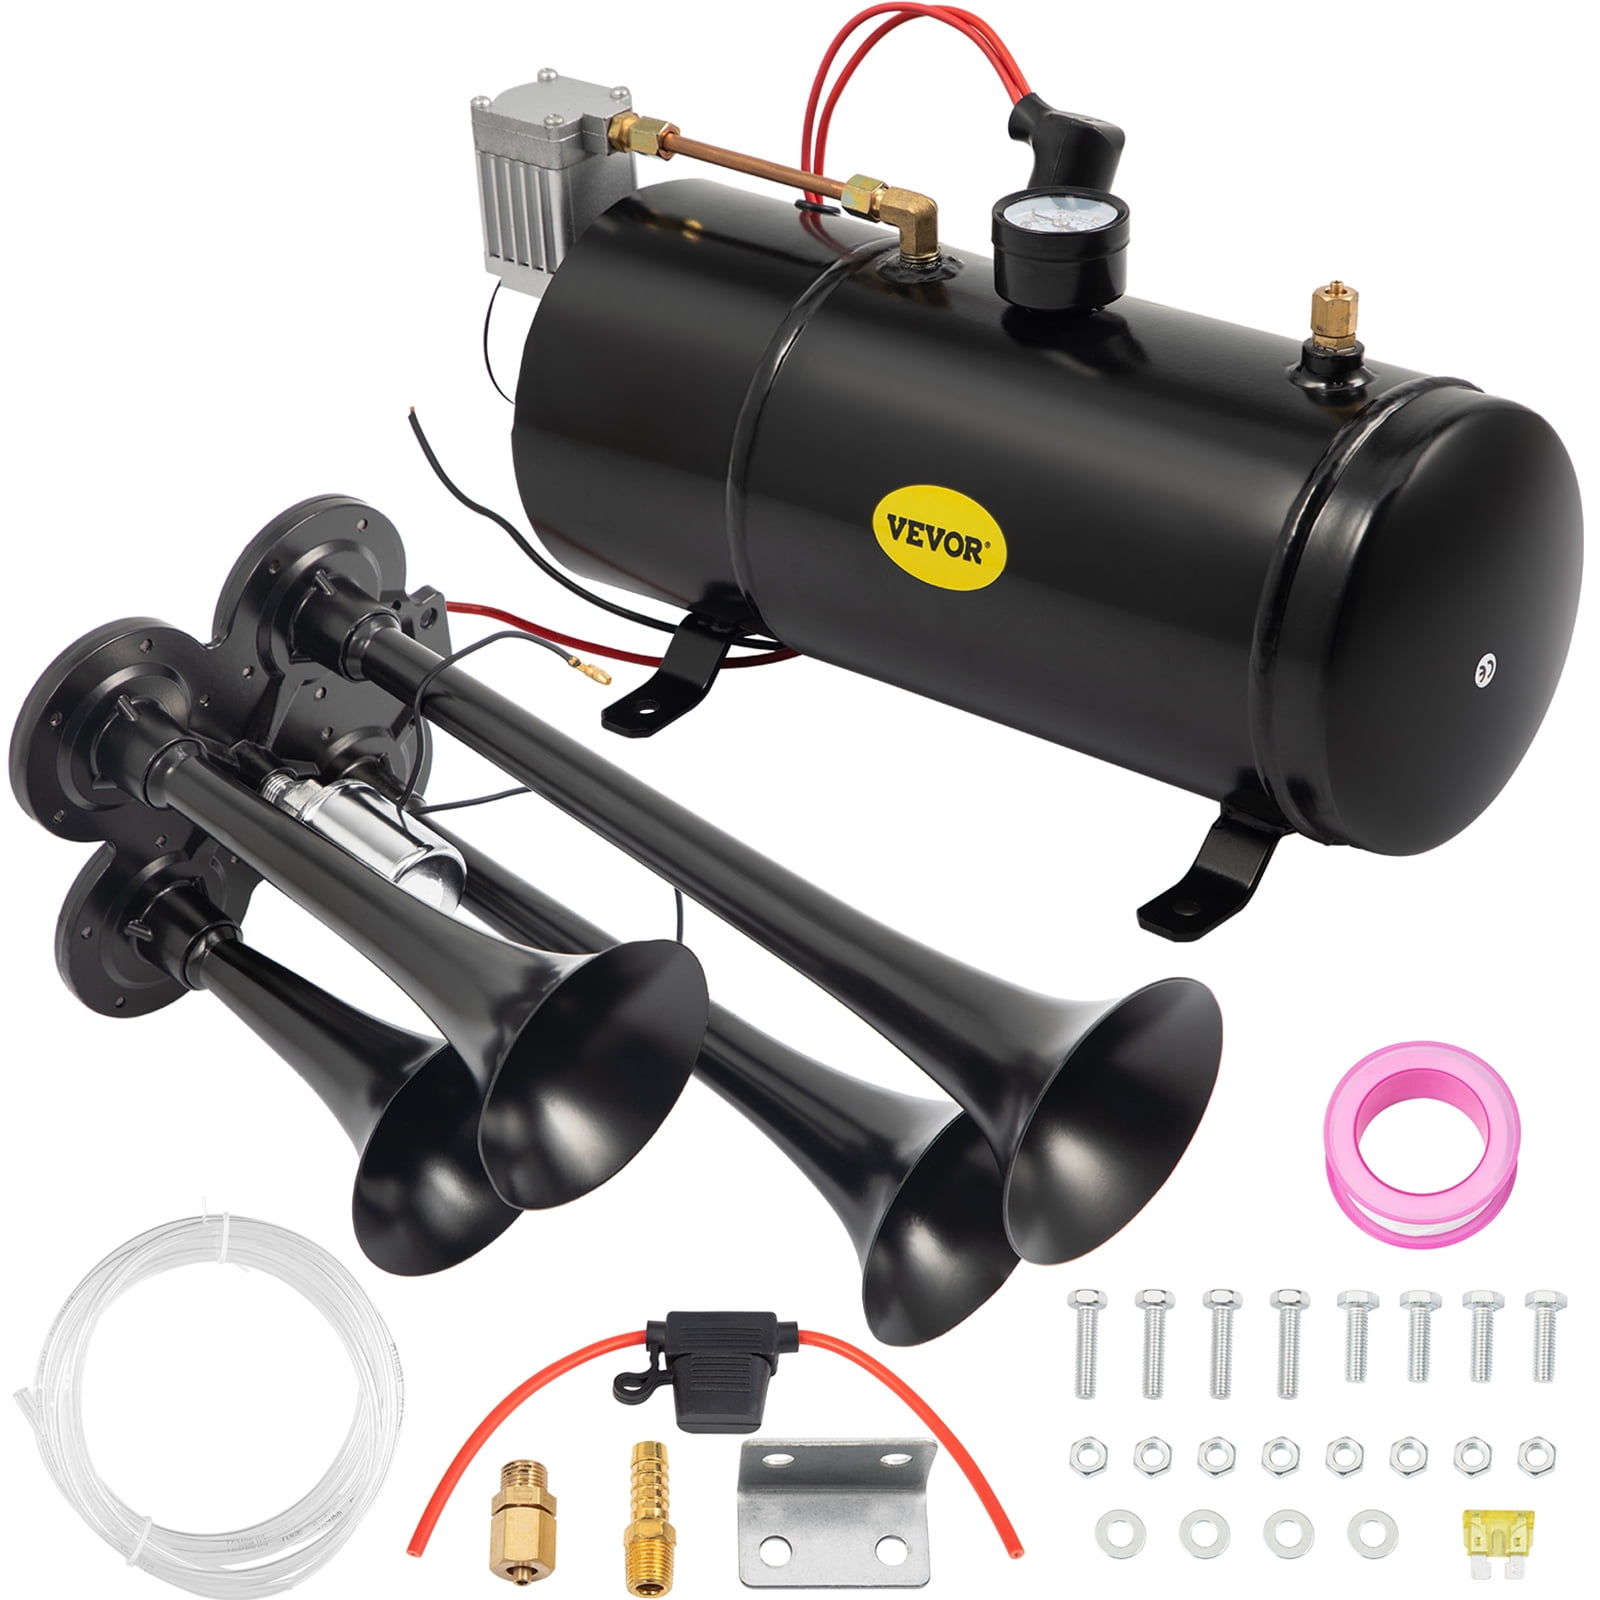 Black HK Replacement 12V Air Compressor Kit for Lorry Boat Van Horns Vehicle Truck Train Car 